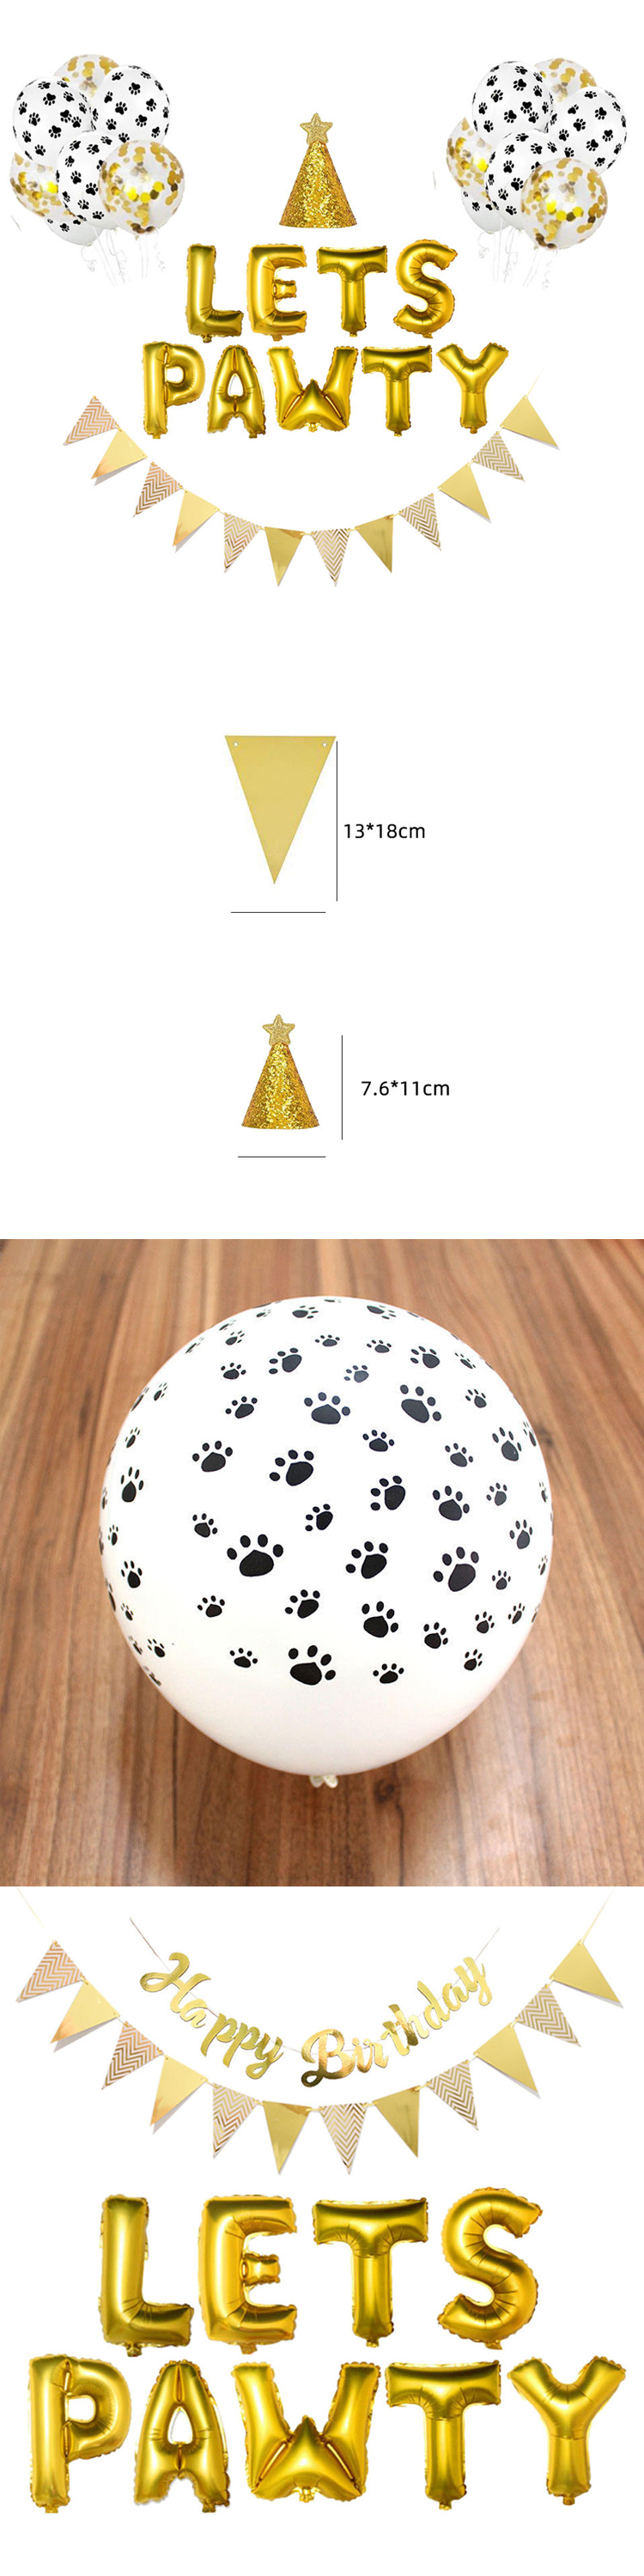 PAFU Pet Birthday Party Supplies Dog Birthday Lets Pawty Balloons Banner Hat Decoration kit